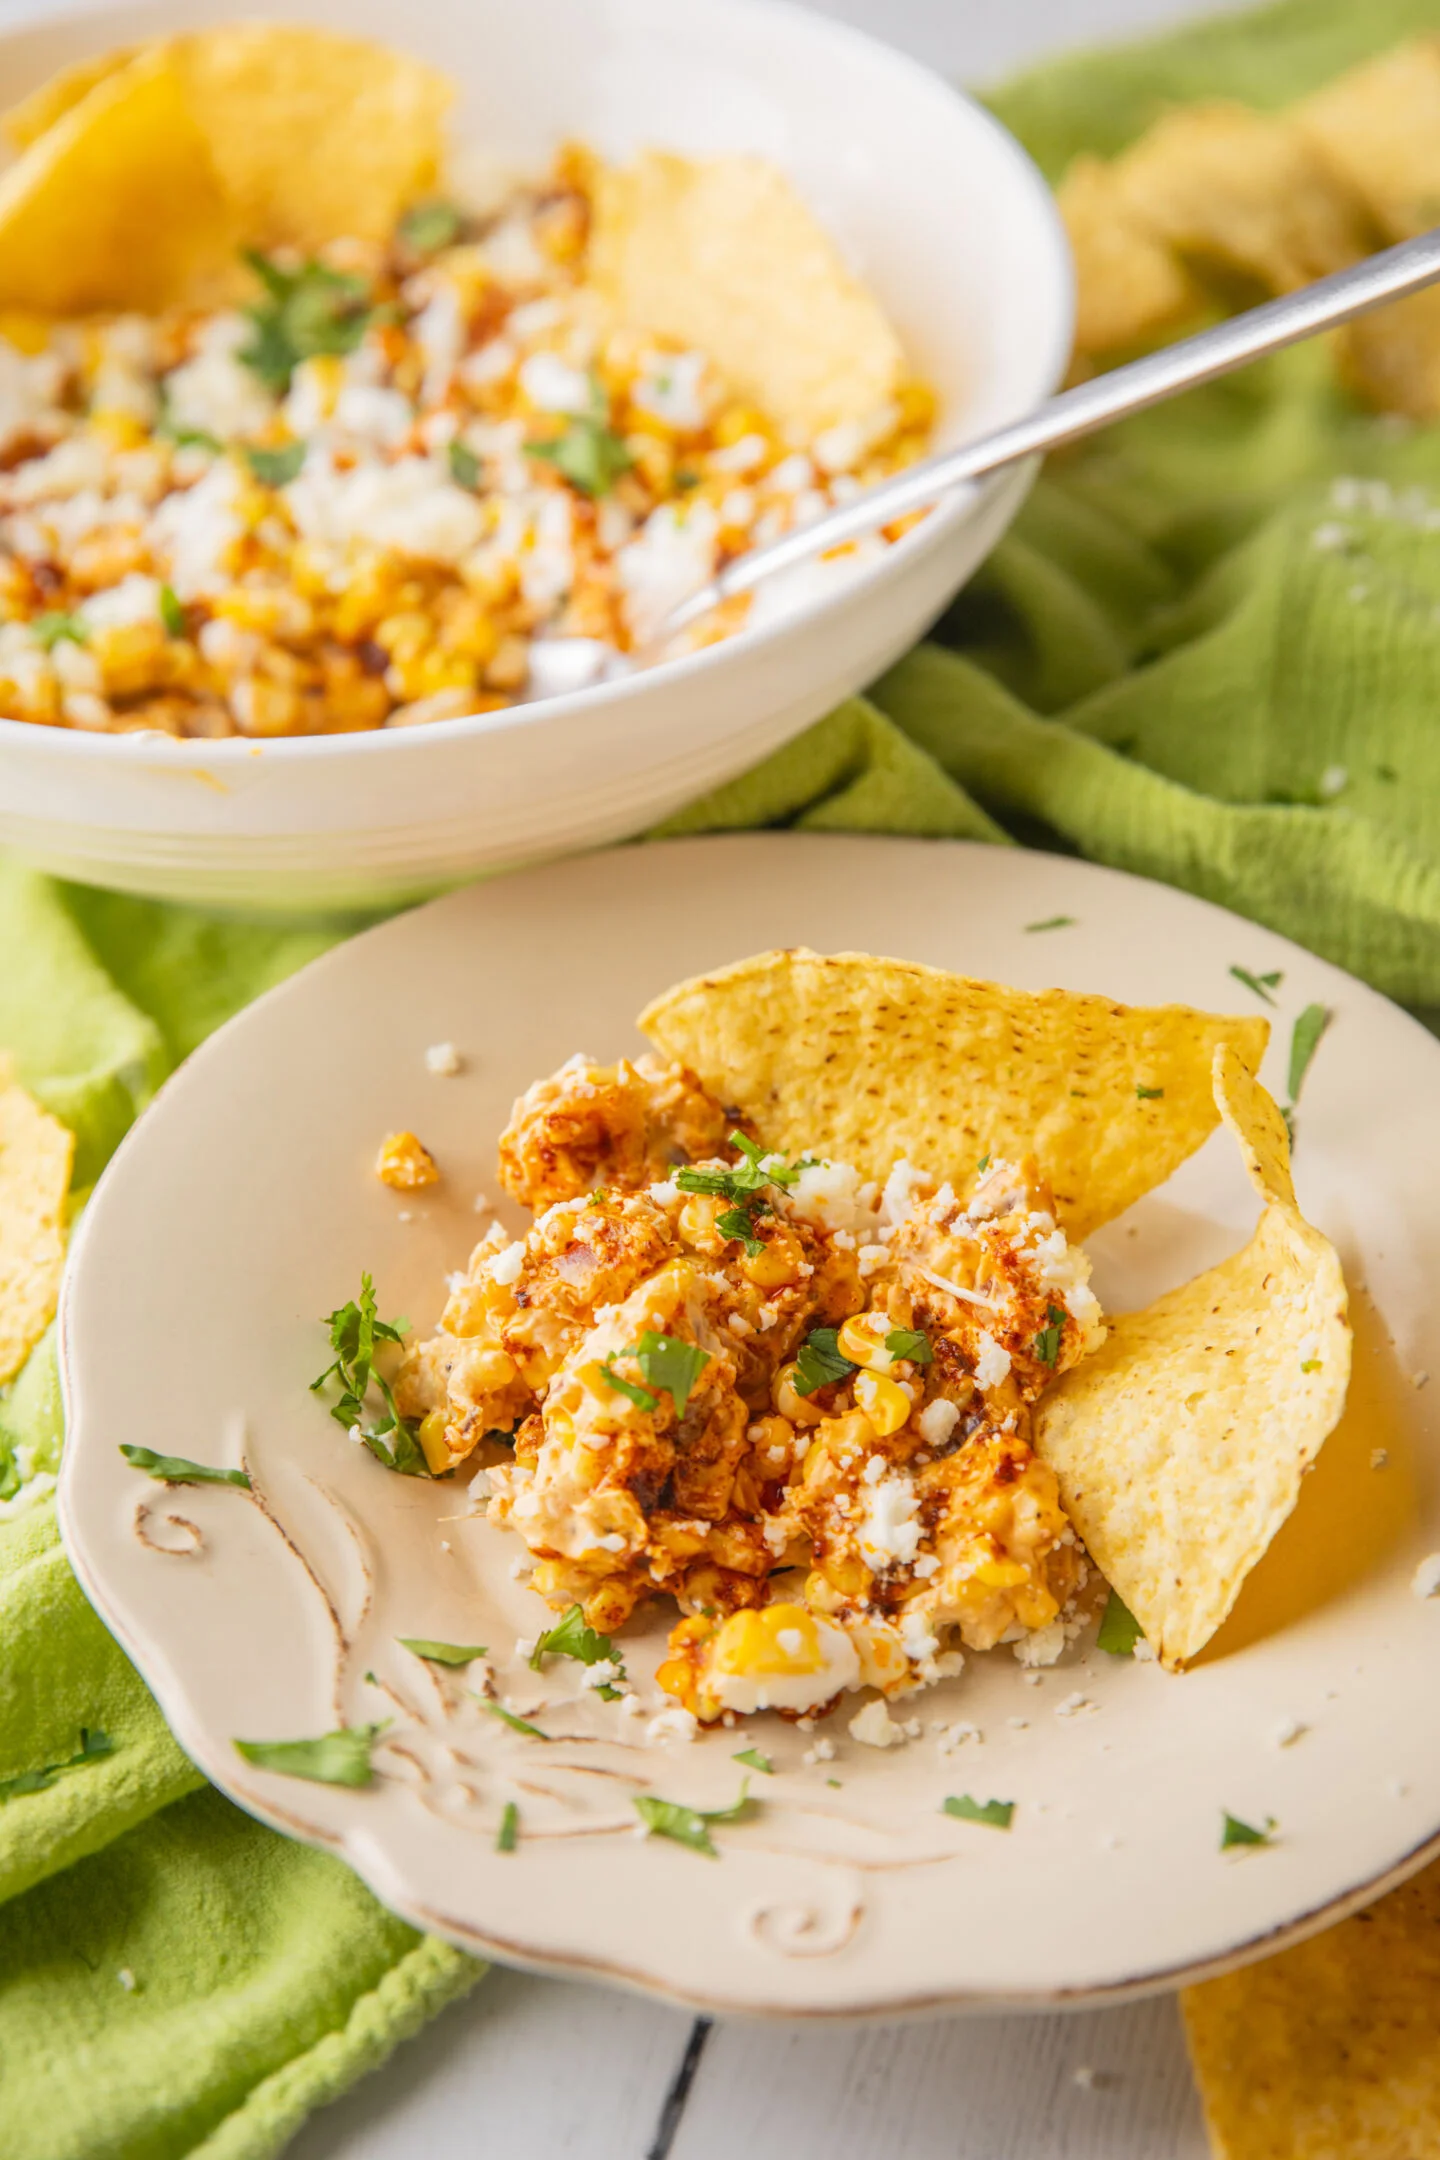 Serve with lots of corn chips for scooping